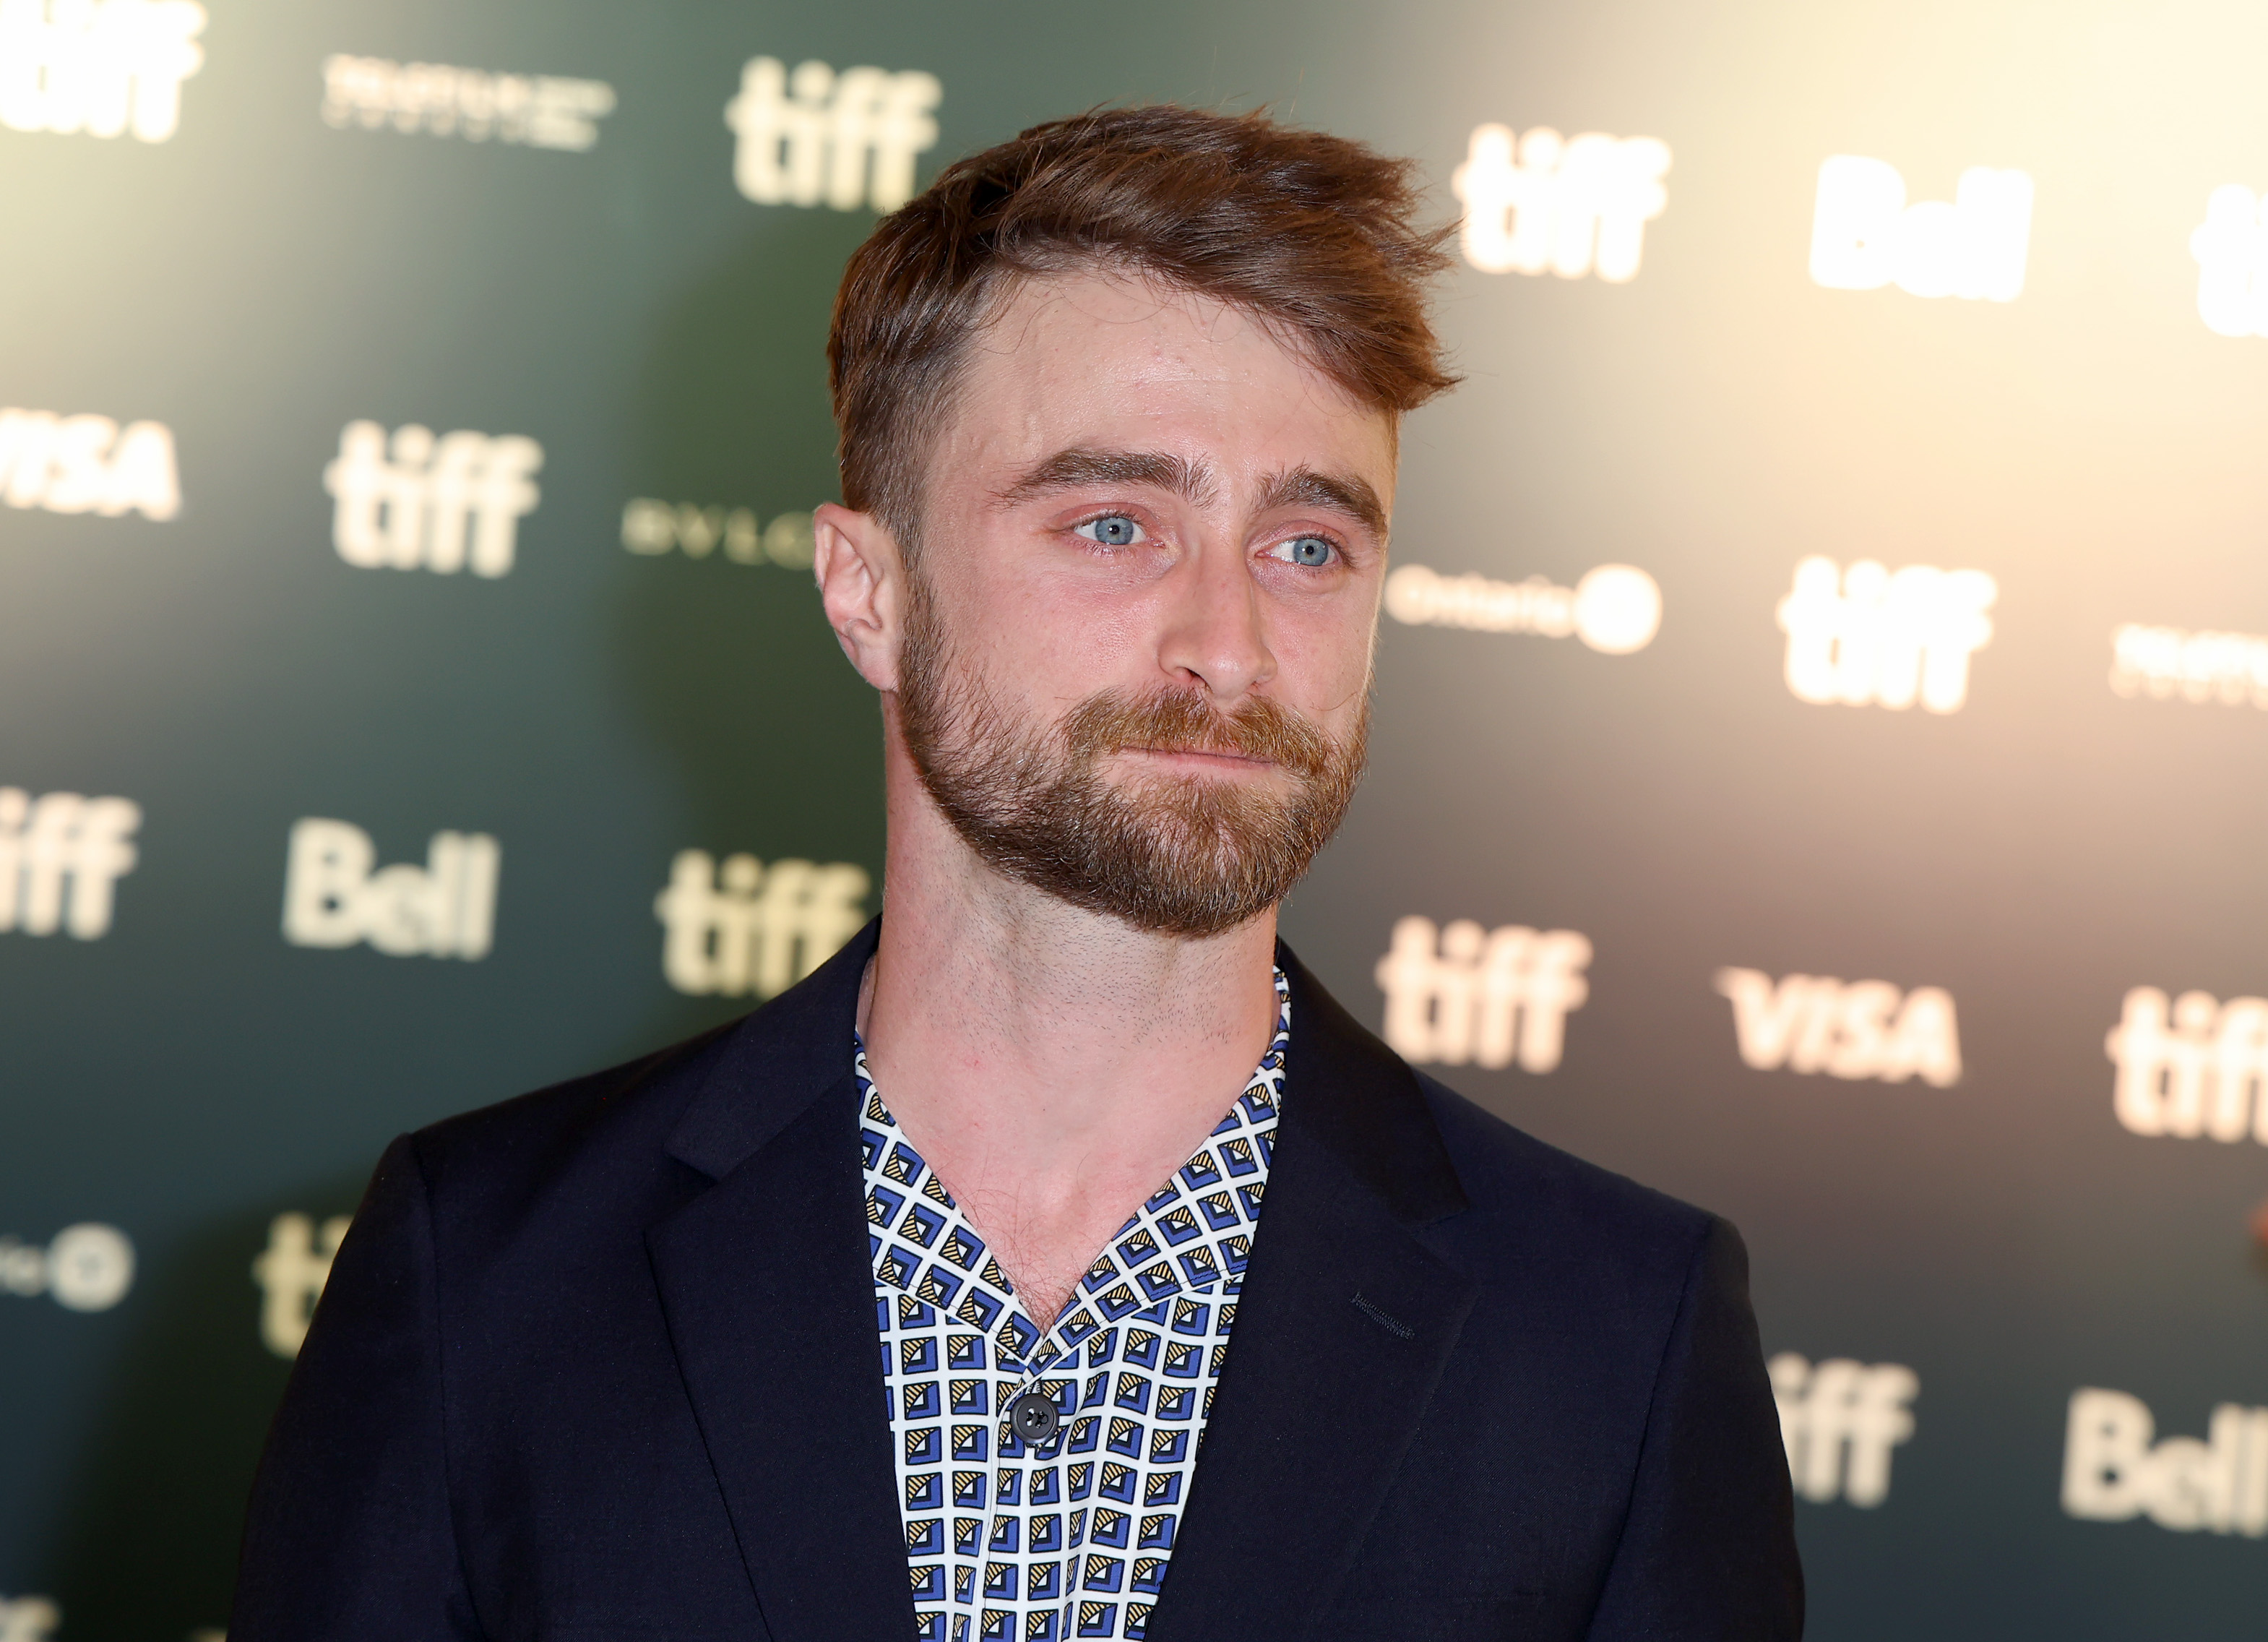 Daniel Radcliffe at the "Weird: The Al Yankovic Story" premiere in Toronto in 2022 | Source: Getty Images